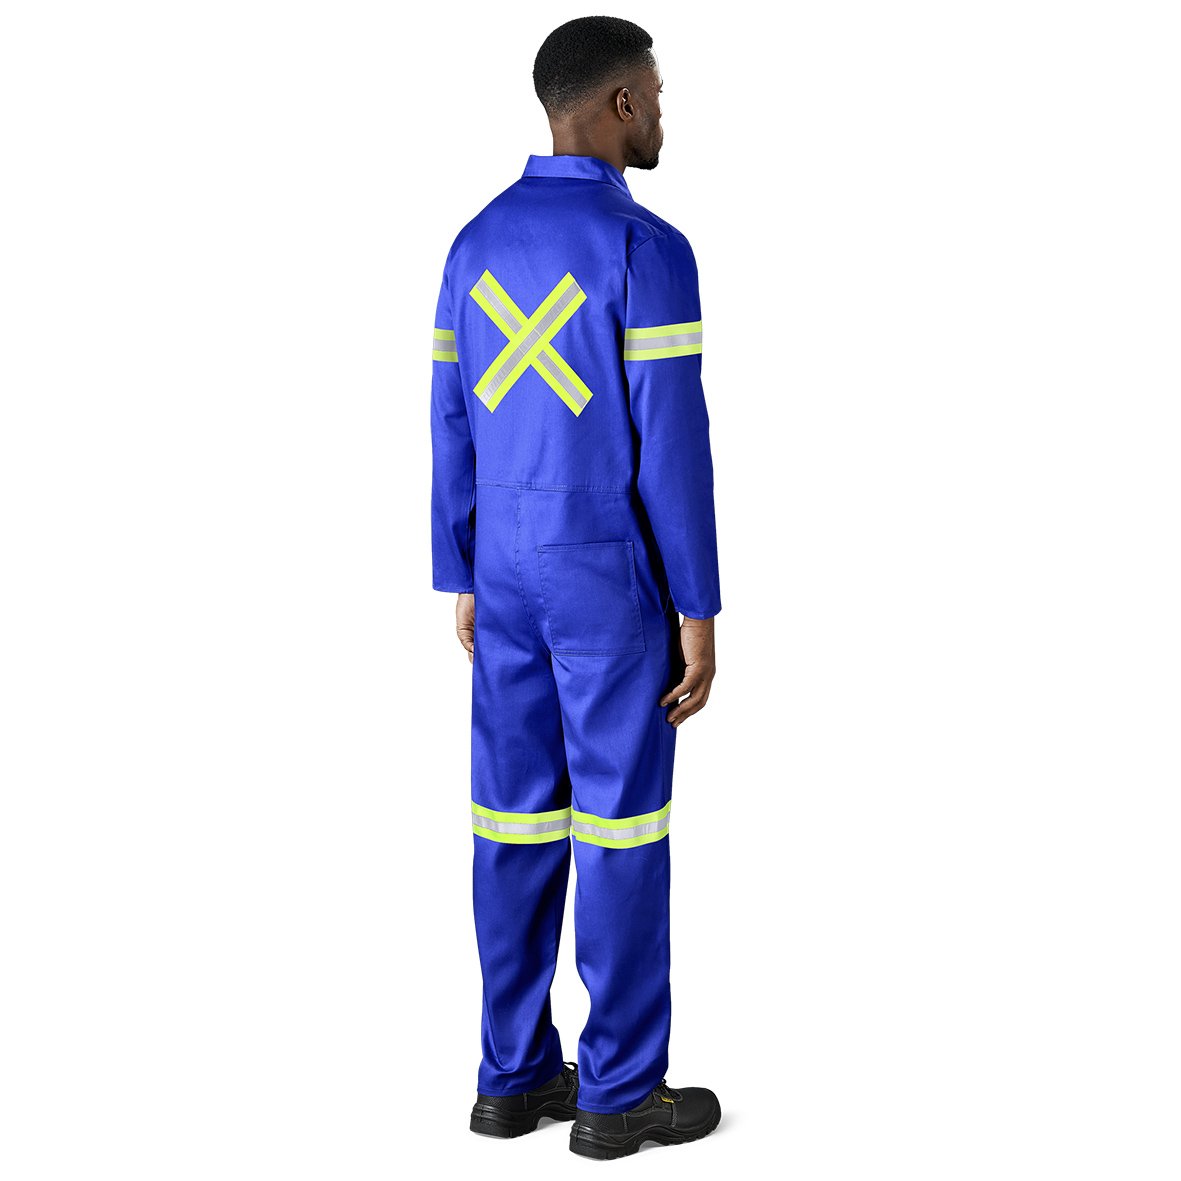 Safety Polycotton Boiler Suit - Reflective Arms Legs amp; Back - Yellow Tape